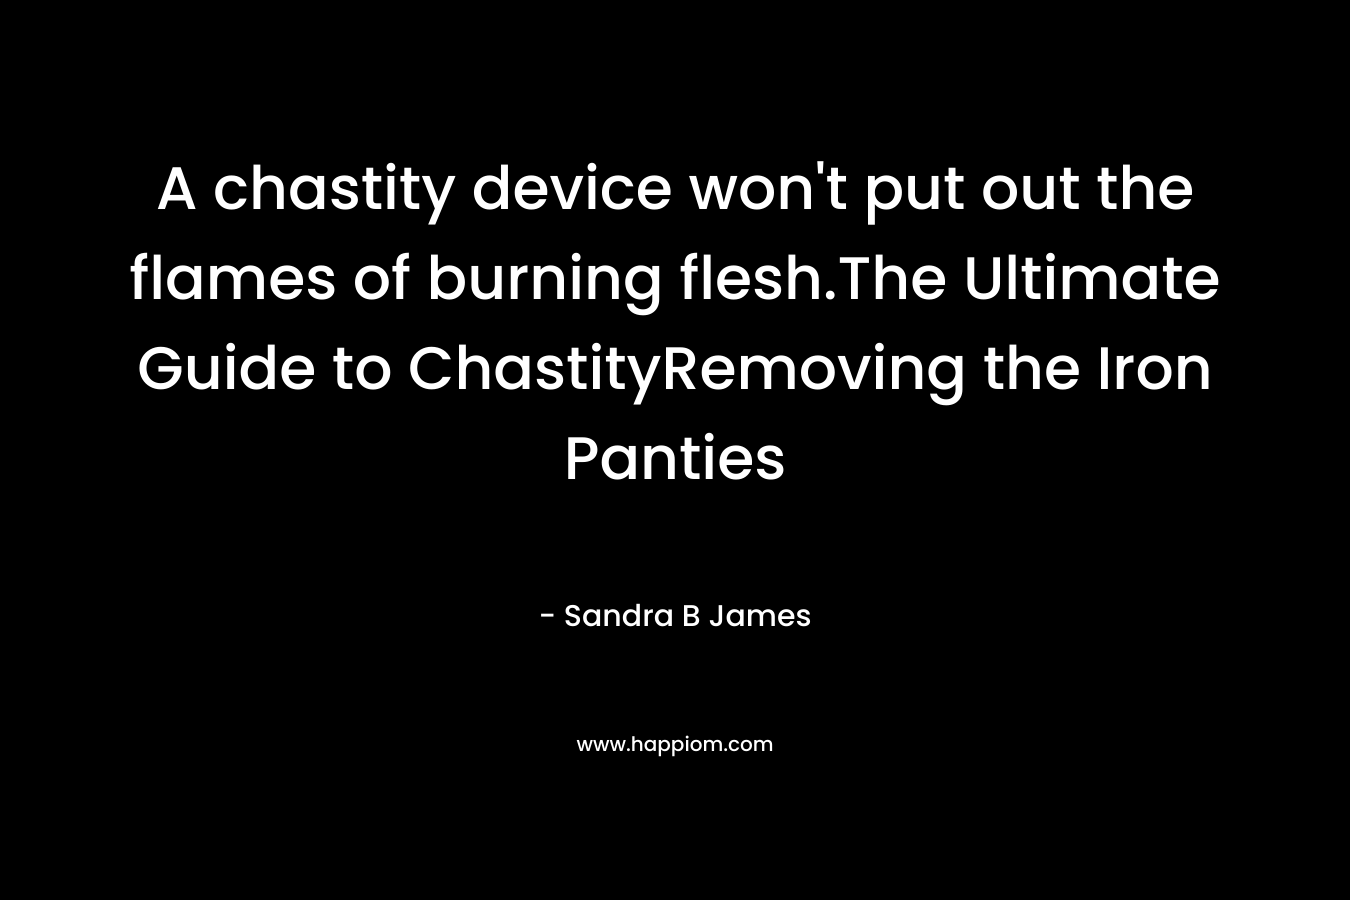 A chastity device won't put out the flames of burning flesh.The Ultimate Guide to ChastityRemoving the Iron Panties